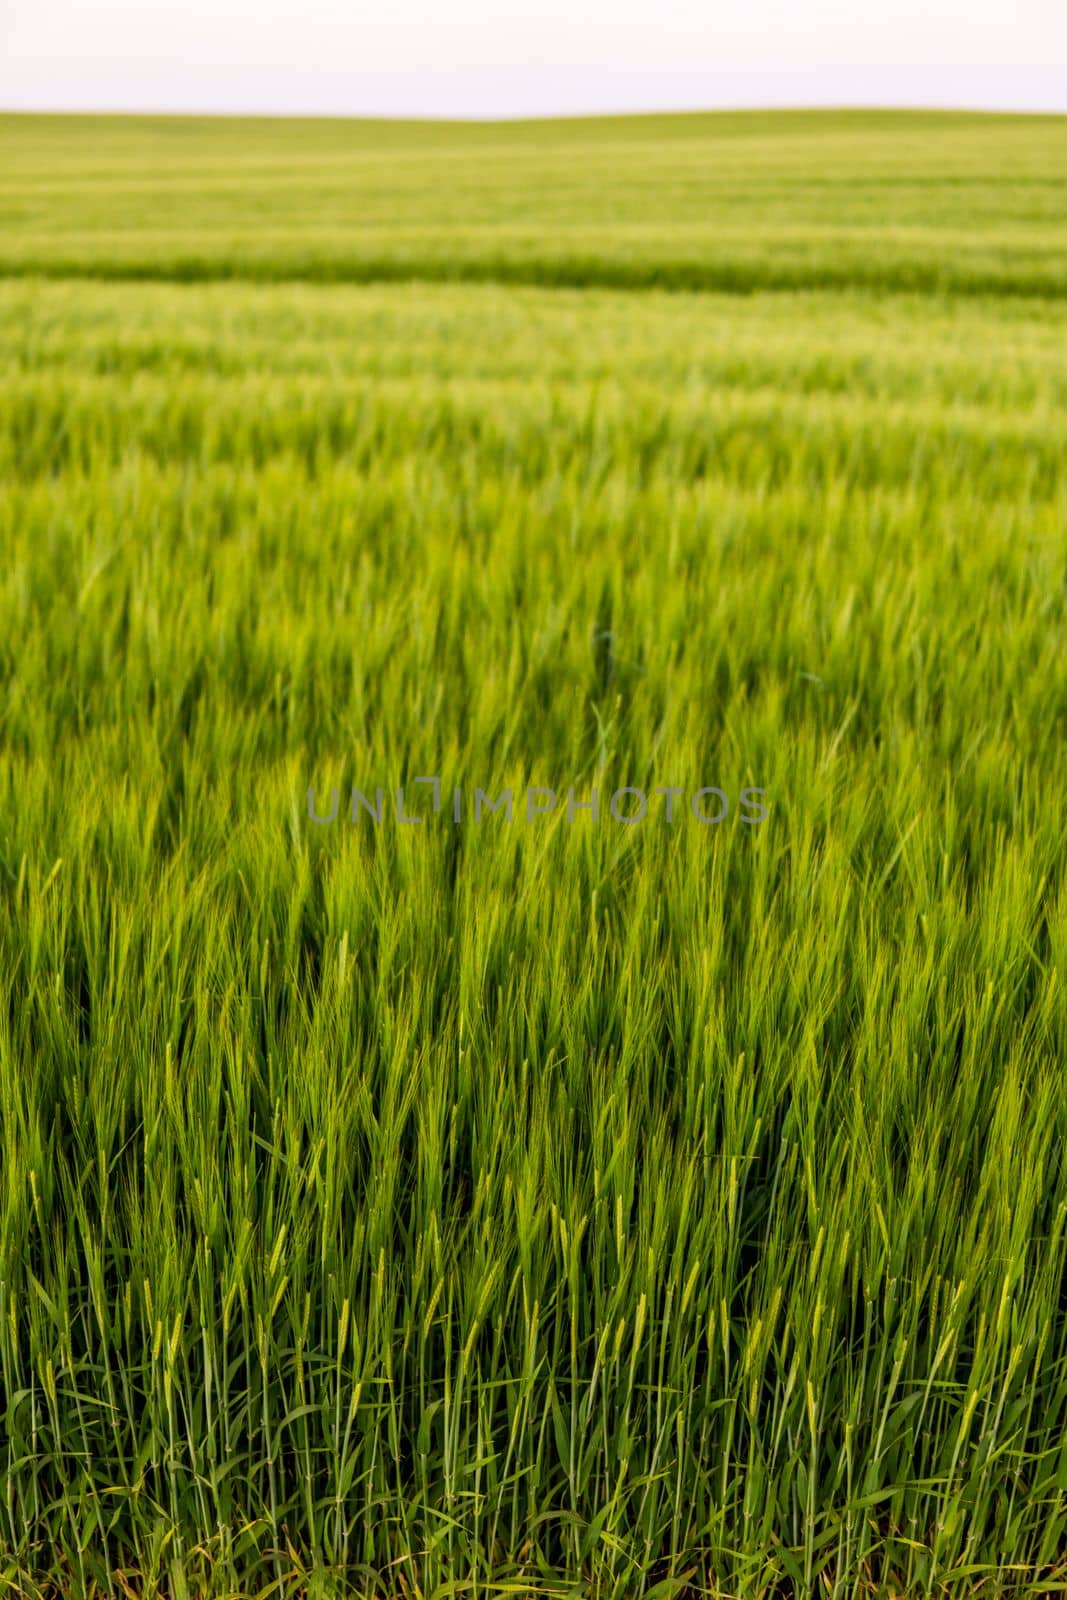 Barley growing in agricultural field in spring. Unripe cereals